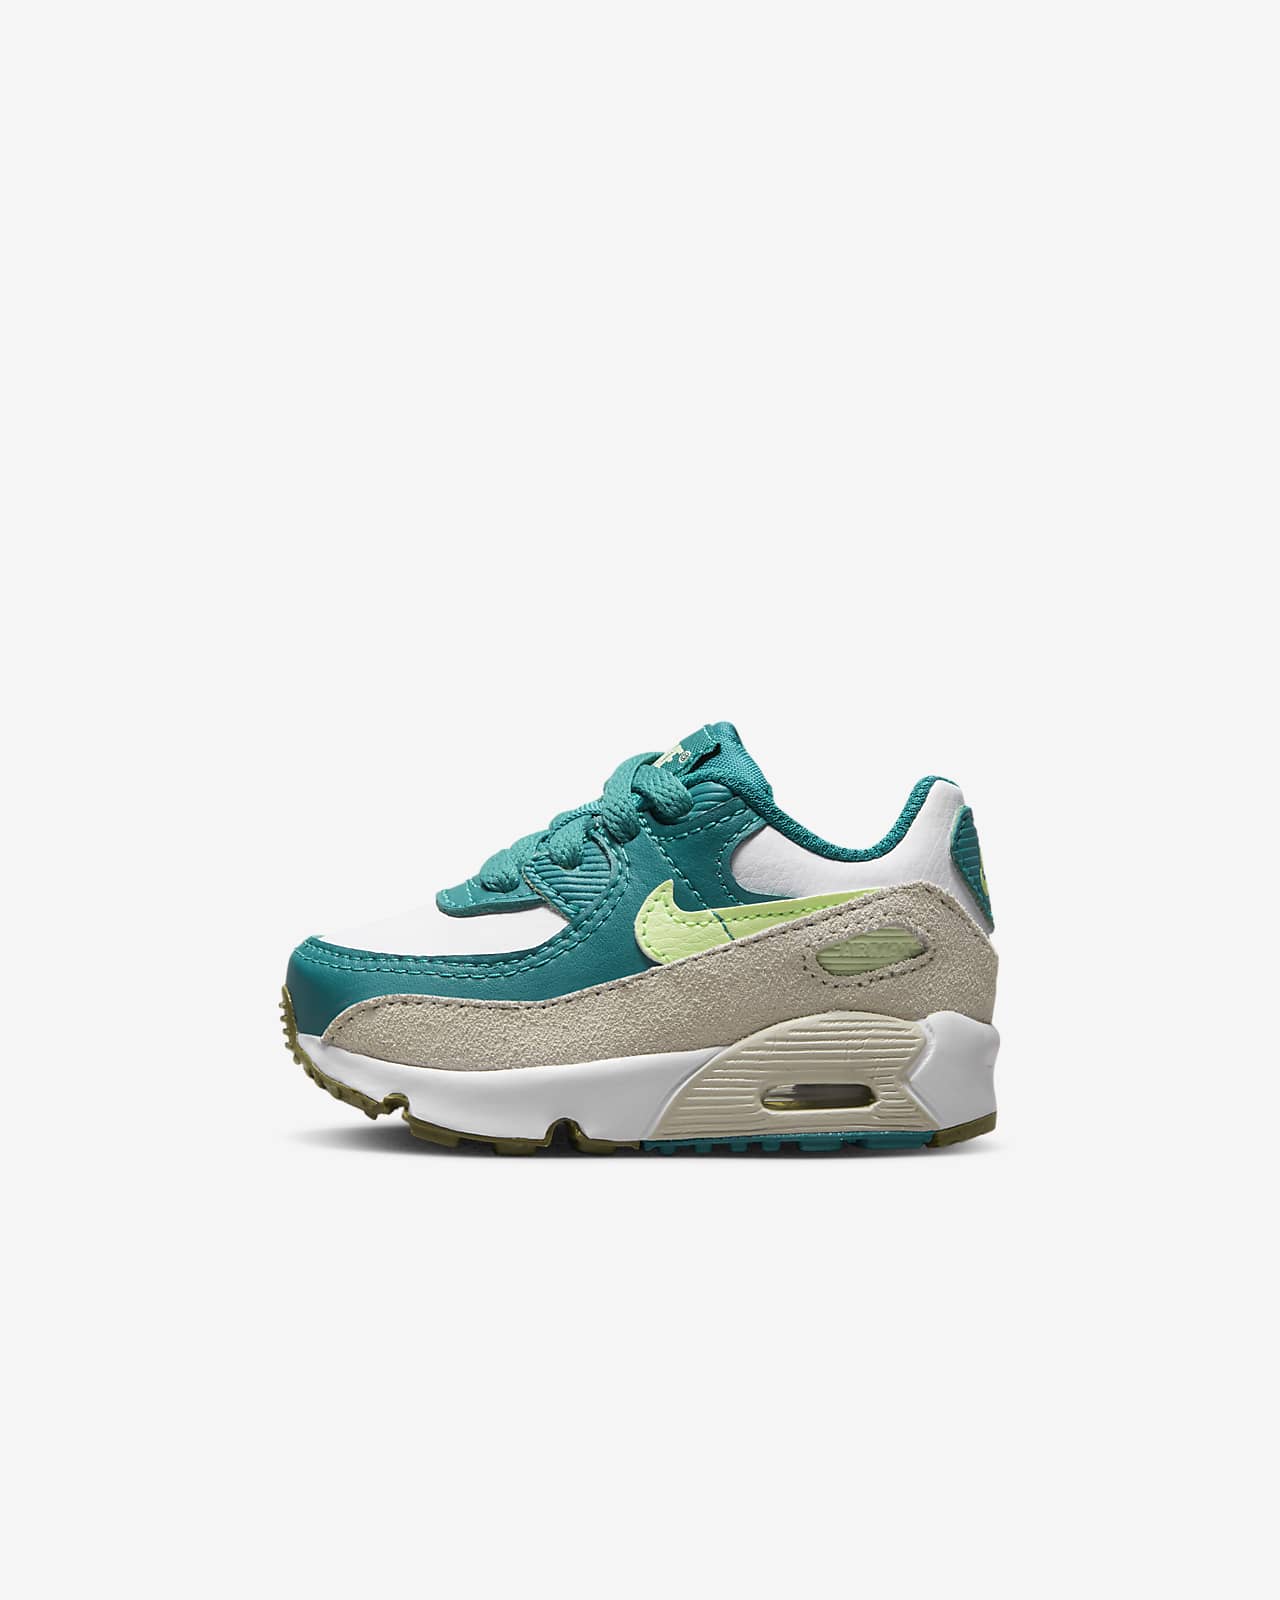 Imperial Resignation Bad faith Nike Air Max 90 LTR Baby/Toddler Shoes. Nike.com